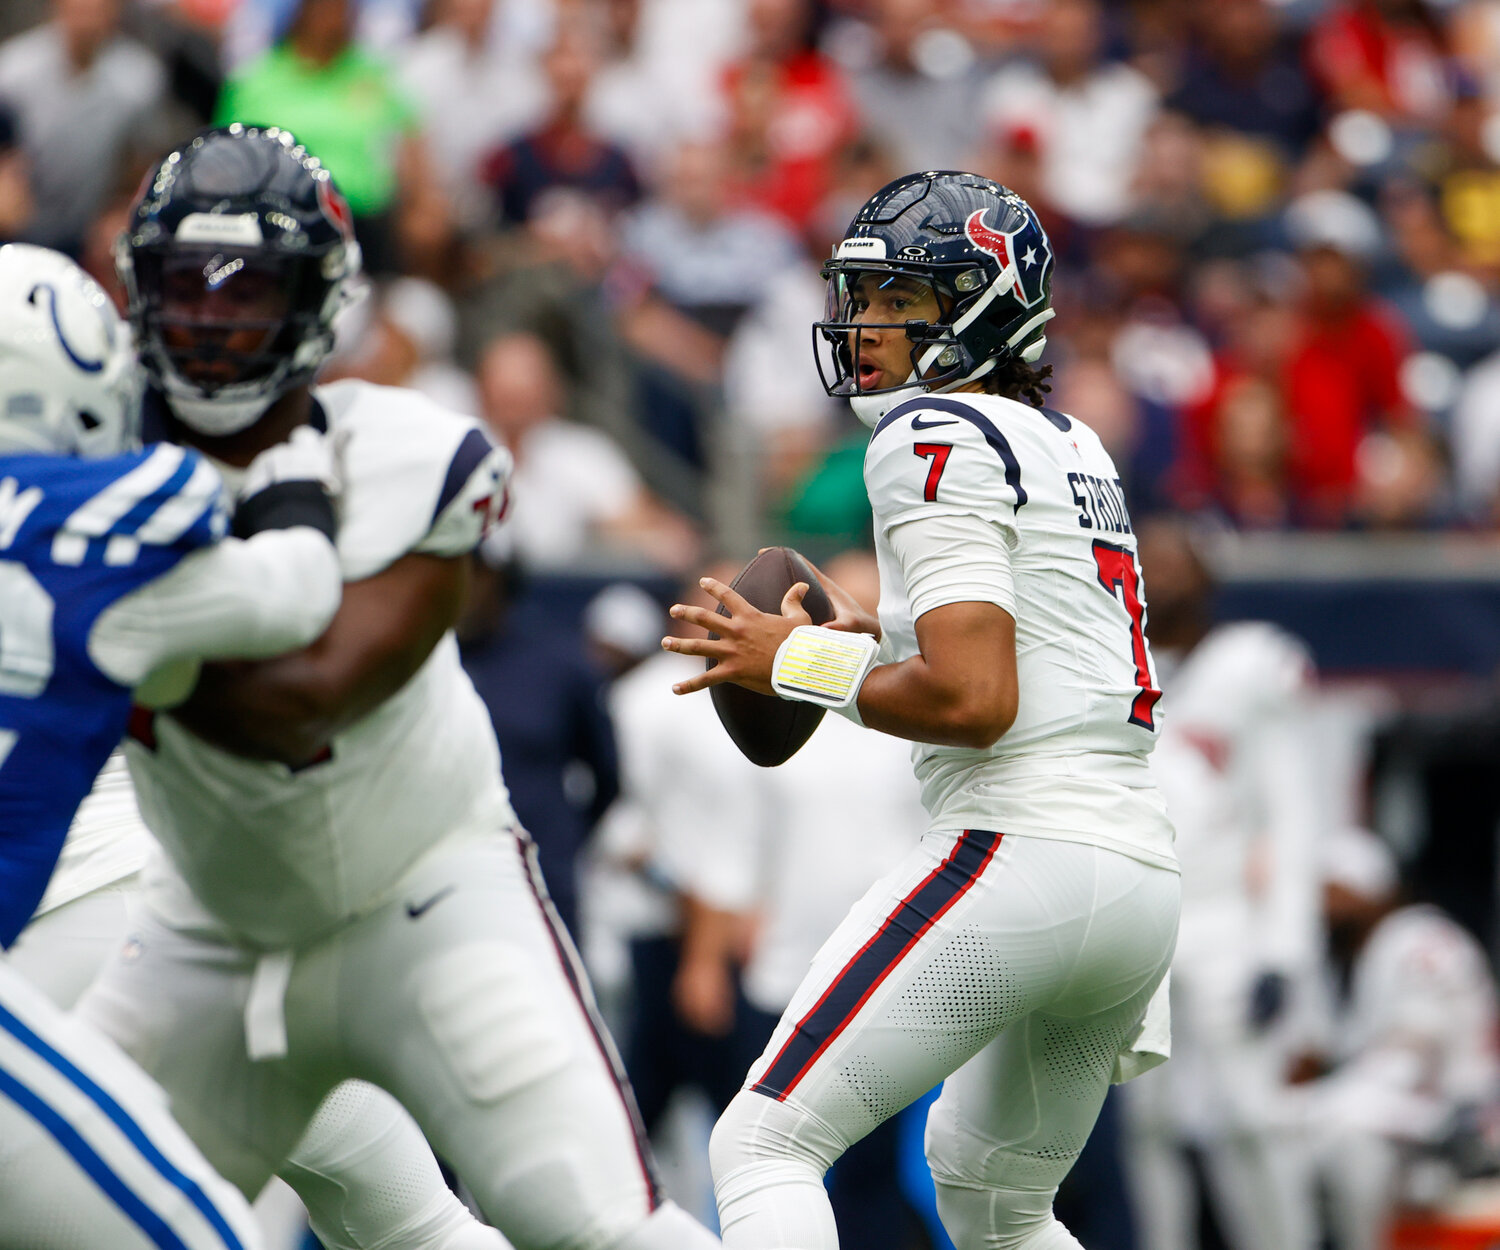 Texans quarterback C.J. Stroud (7) looks to pass the ball during an NFL game between the Texans and the Colts on September 17, 2023 in Houston. The Colts won, 31-20.